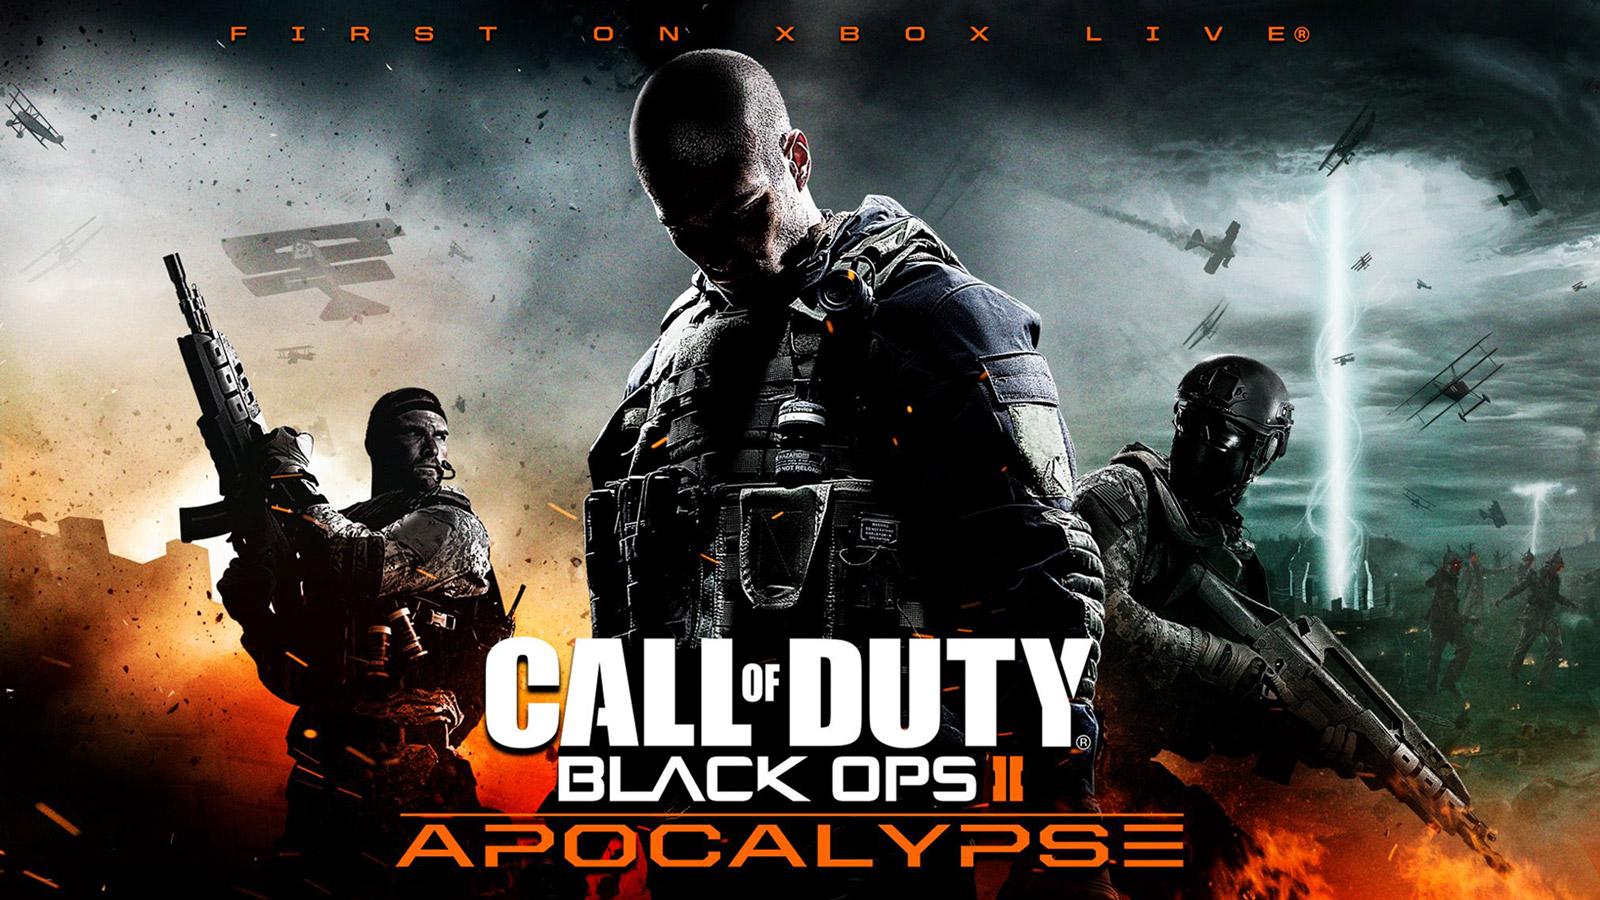 Call of Duty: Black Ops 2 Wallpaper in 1600x900